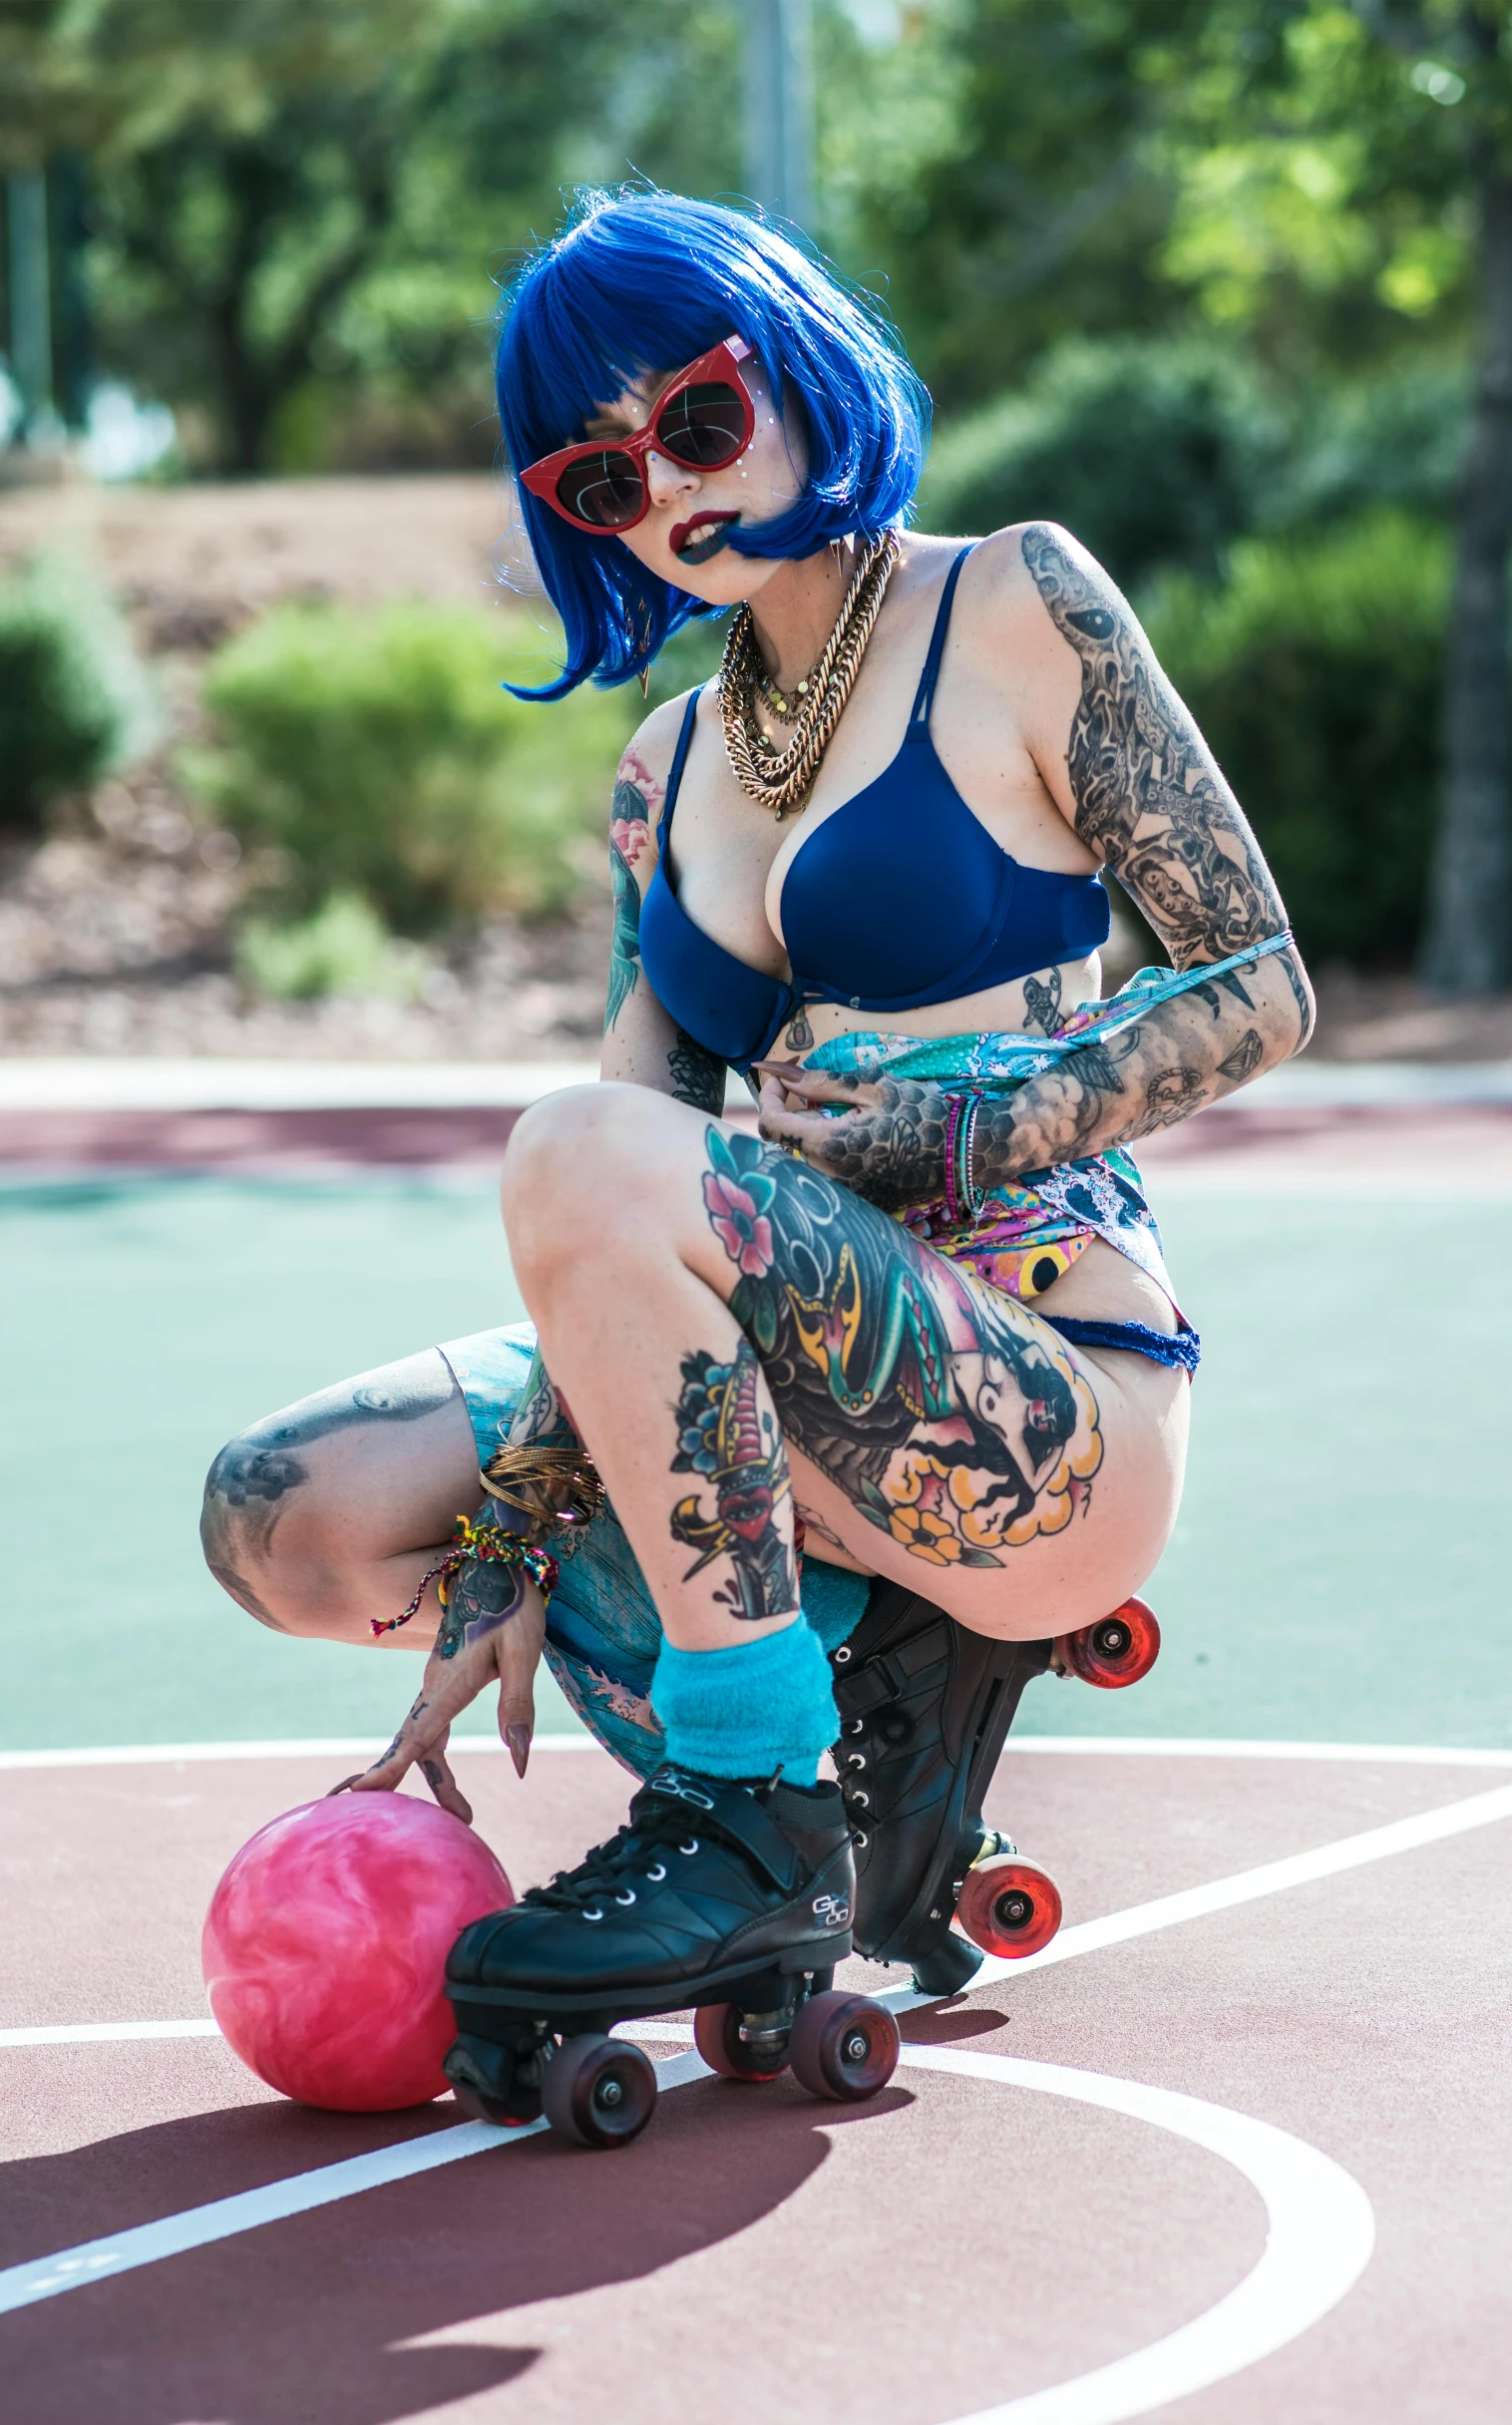 a woman with blue hair sitting on a skateboard, a tattoo, blue undergarments, 15081959 21121991 01012000 4k, no watermark, colorful ink